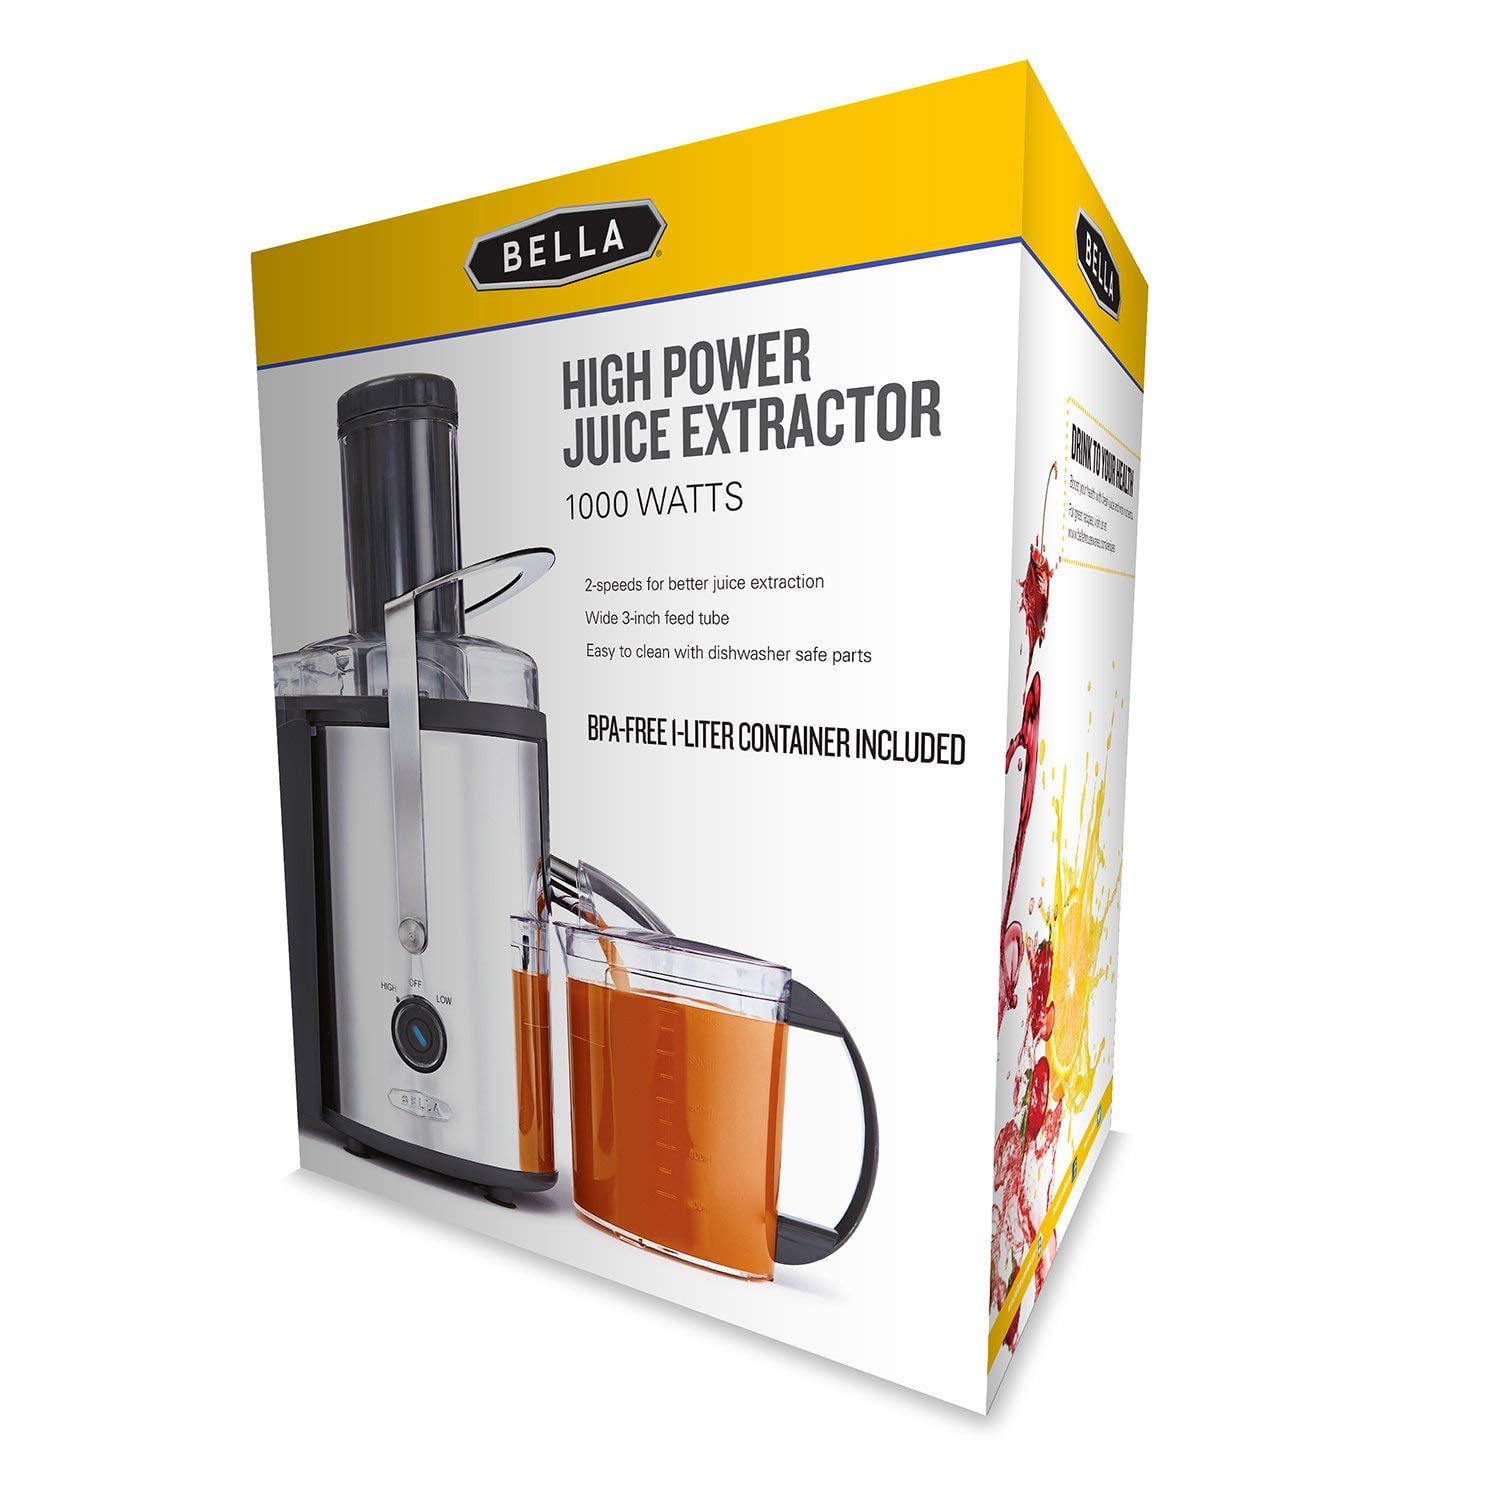 BELLA 700Watts Juice Extractor, White with Stainless Steel (NEW) JG1